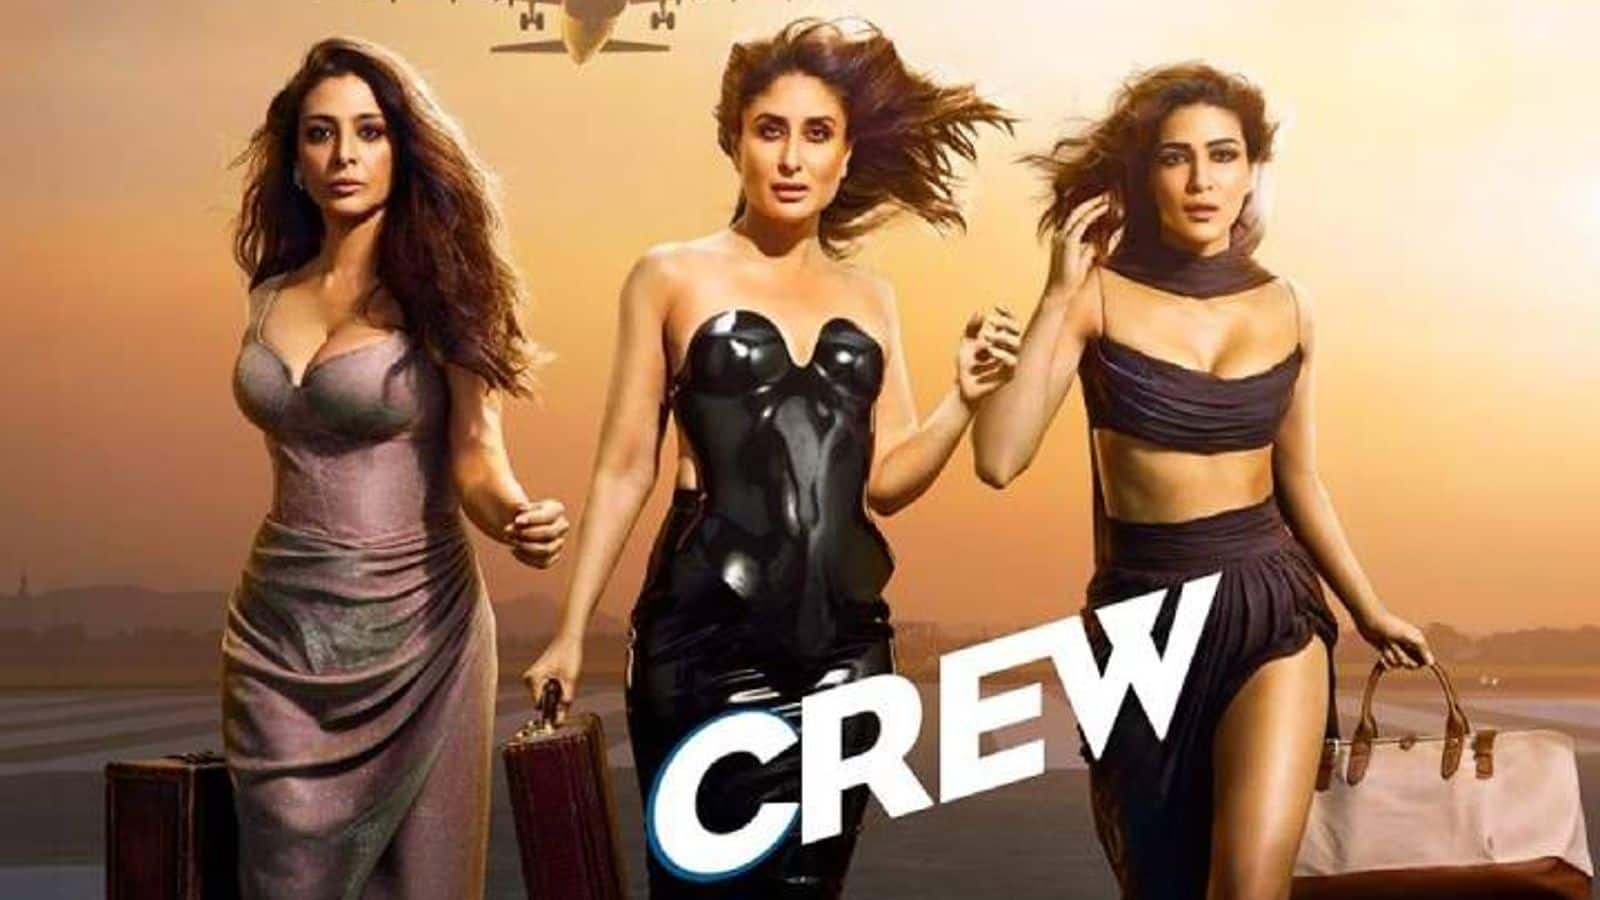 'Crew' continues to impress at box office on Day 21